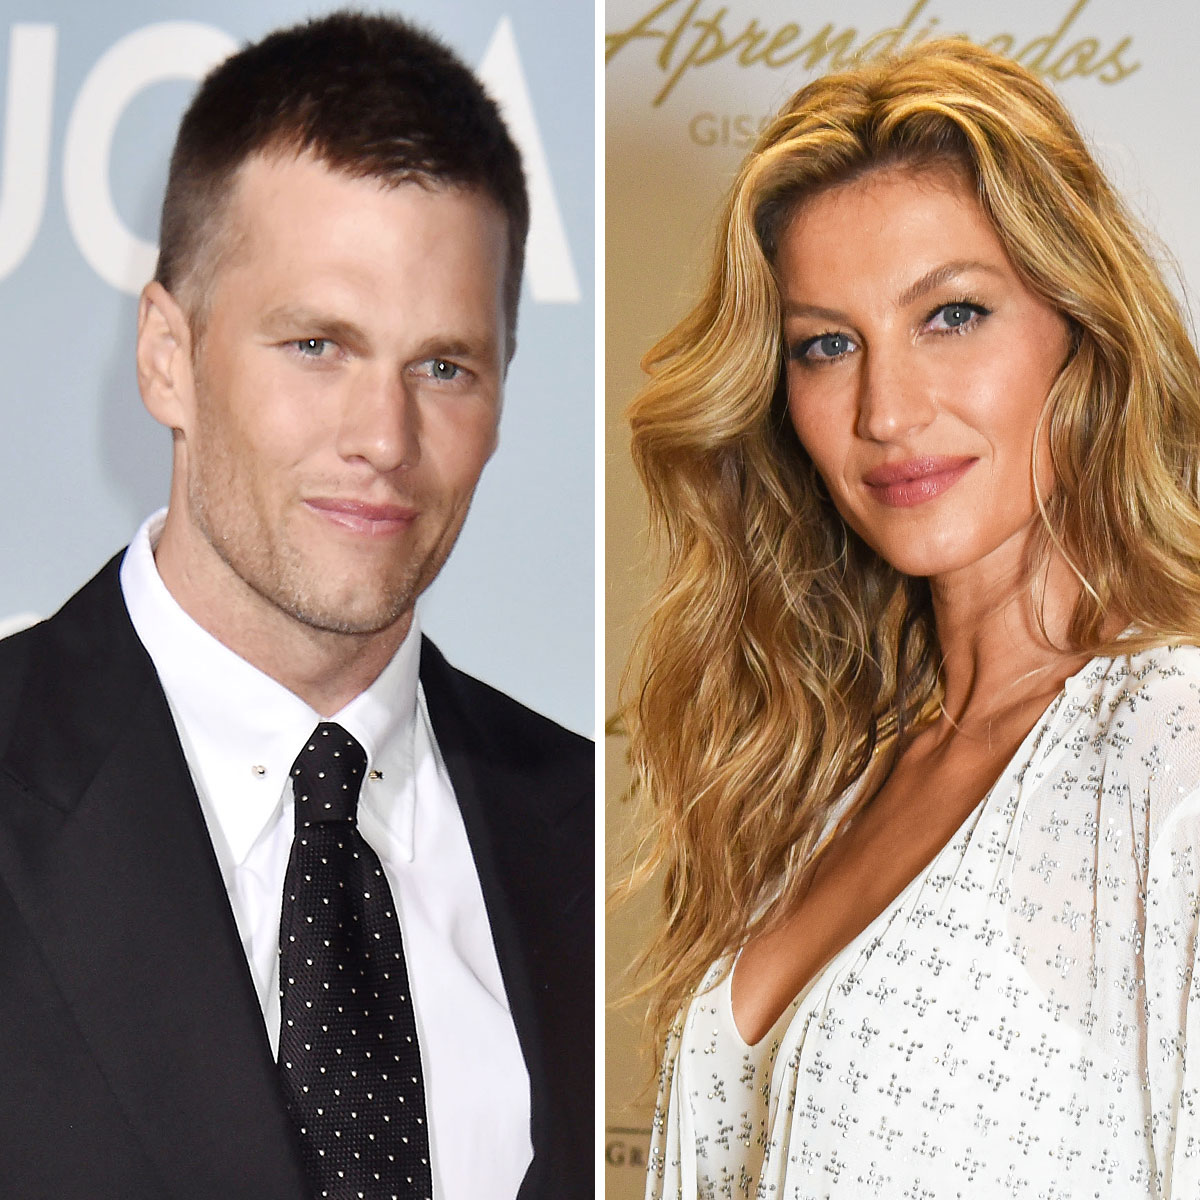 Tom Brady Removes Family Photo With Gisele Bündchen From His Twitter Profile After She’s Spotted With New Man